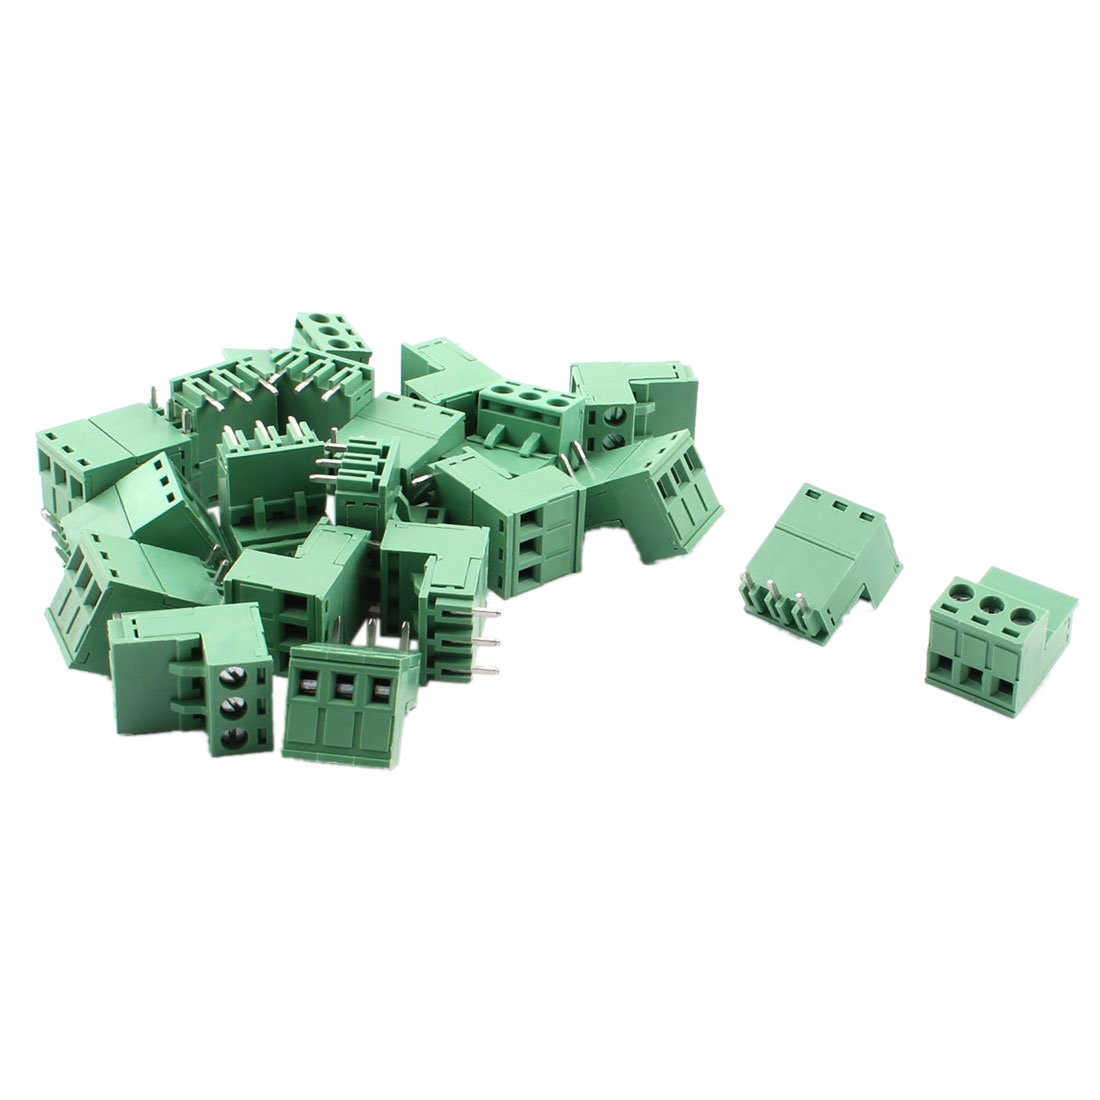 Brand 20 Pcs 5.08Mm 3 Way Pcb Mount Schroefklemmenblok Voor 14-22 Awg Draad